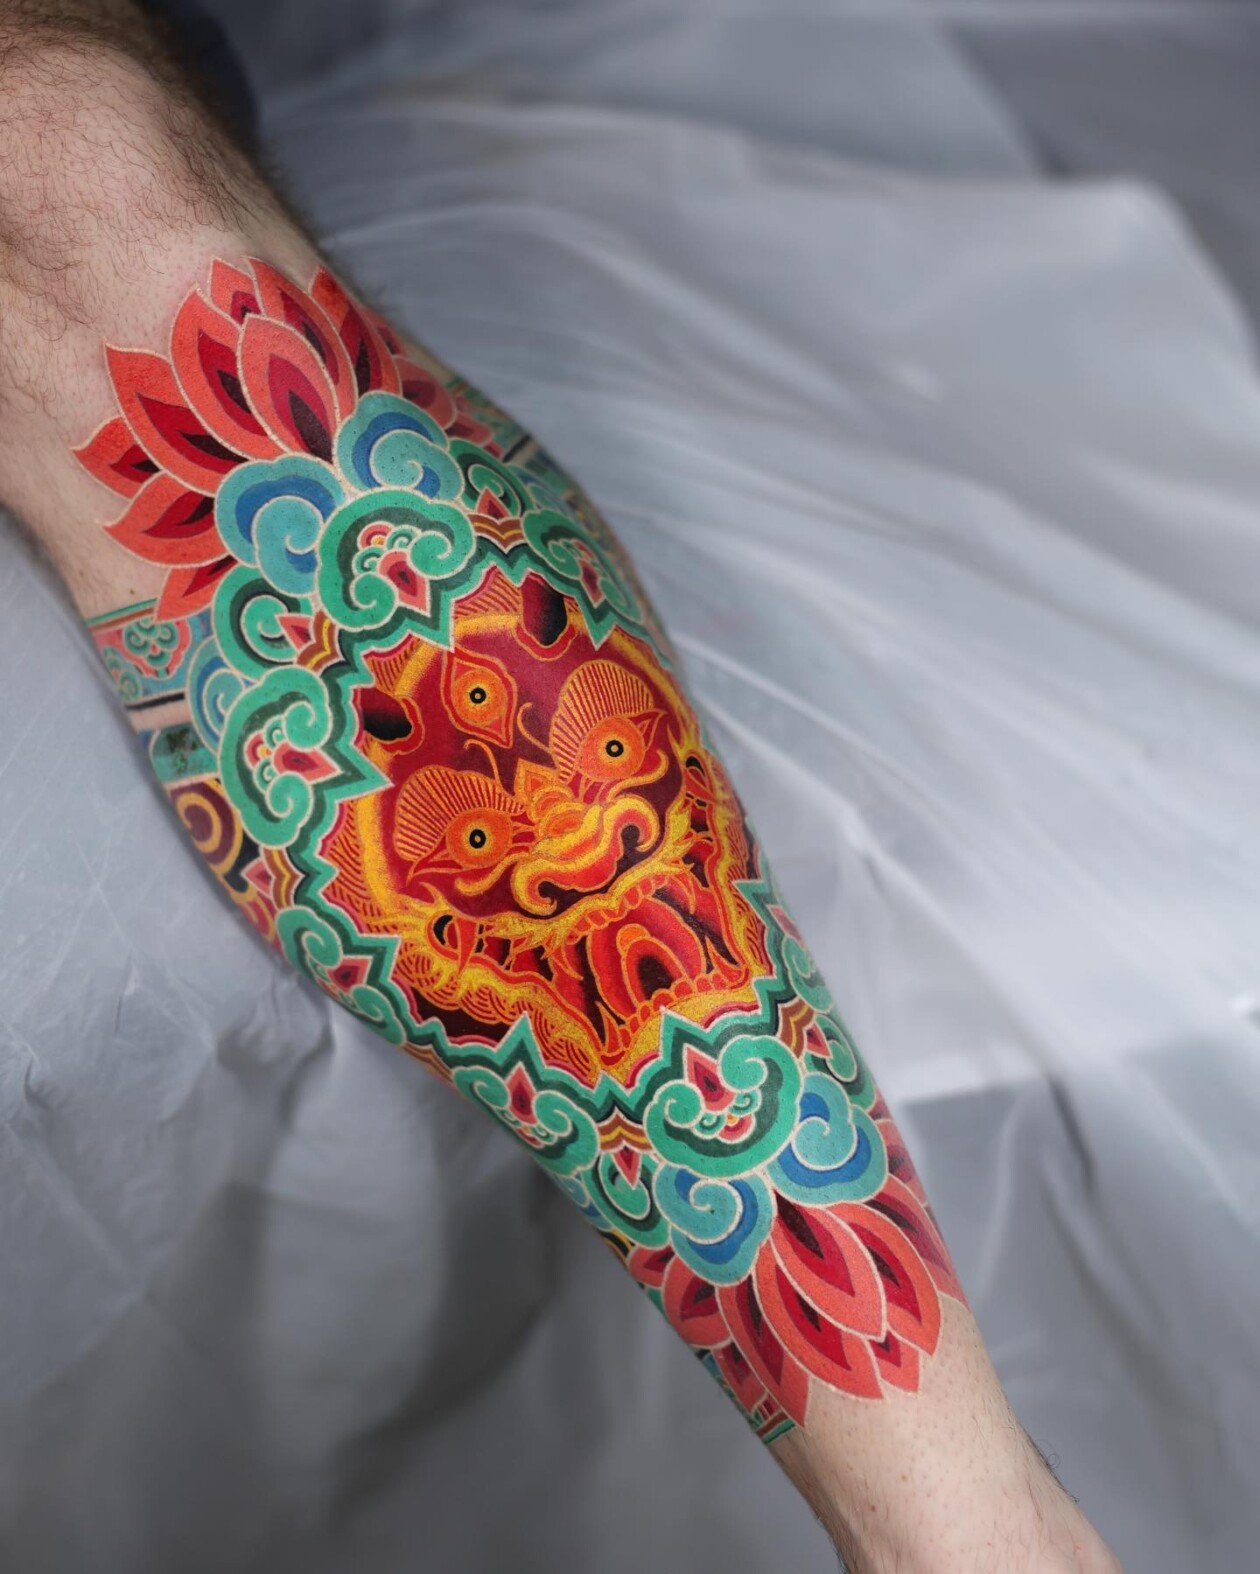 Vibrant Tattoos With Densely Layered Patterns By Korean Artist Pittakkm (8)